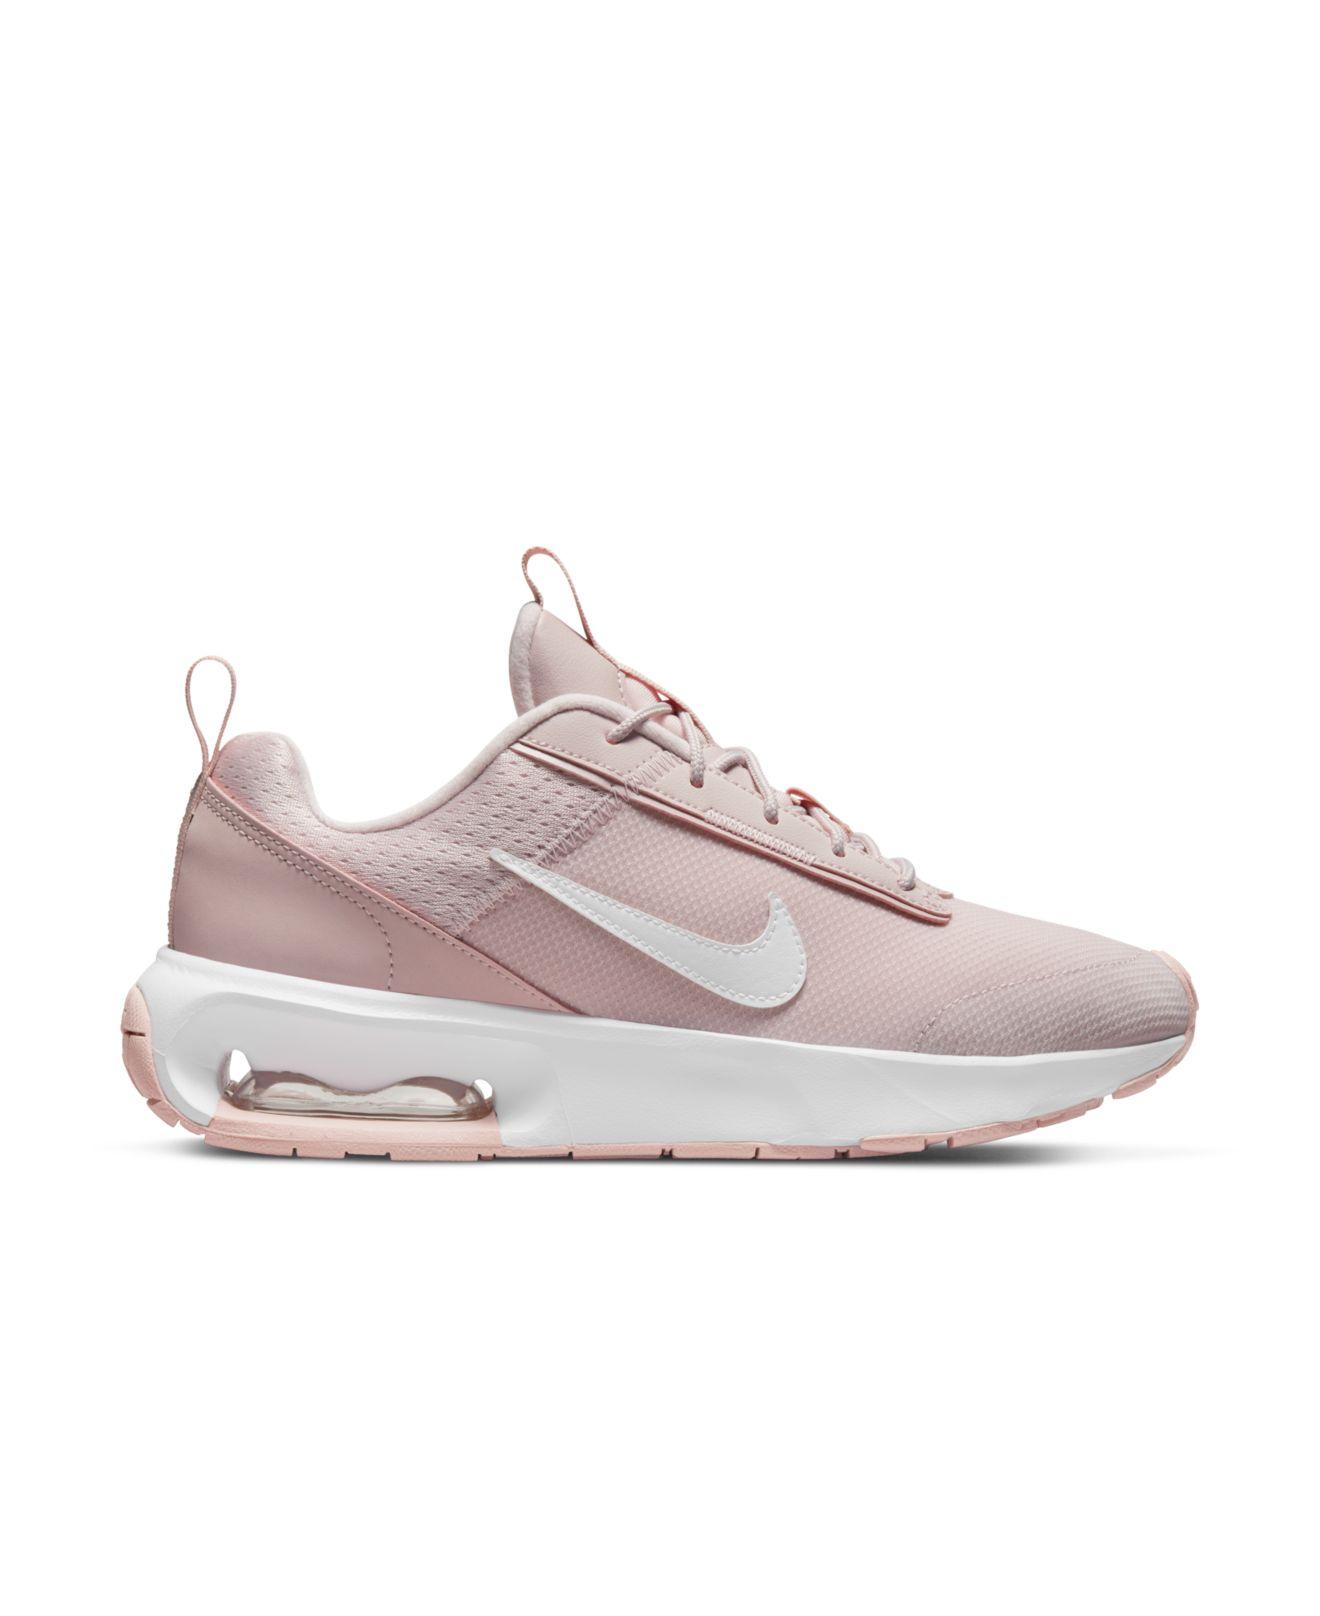 Nike Air Interlock 75 Light Casual From Finish Line in White | Lyst